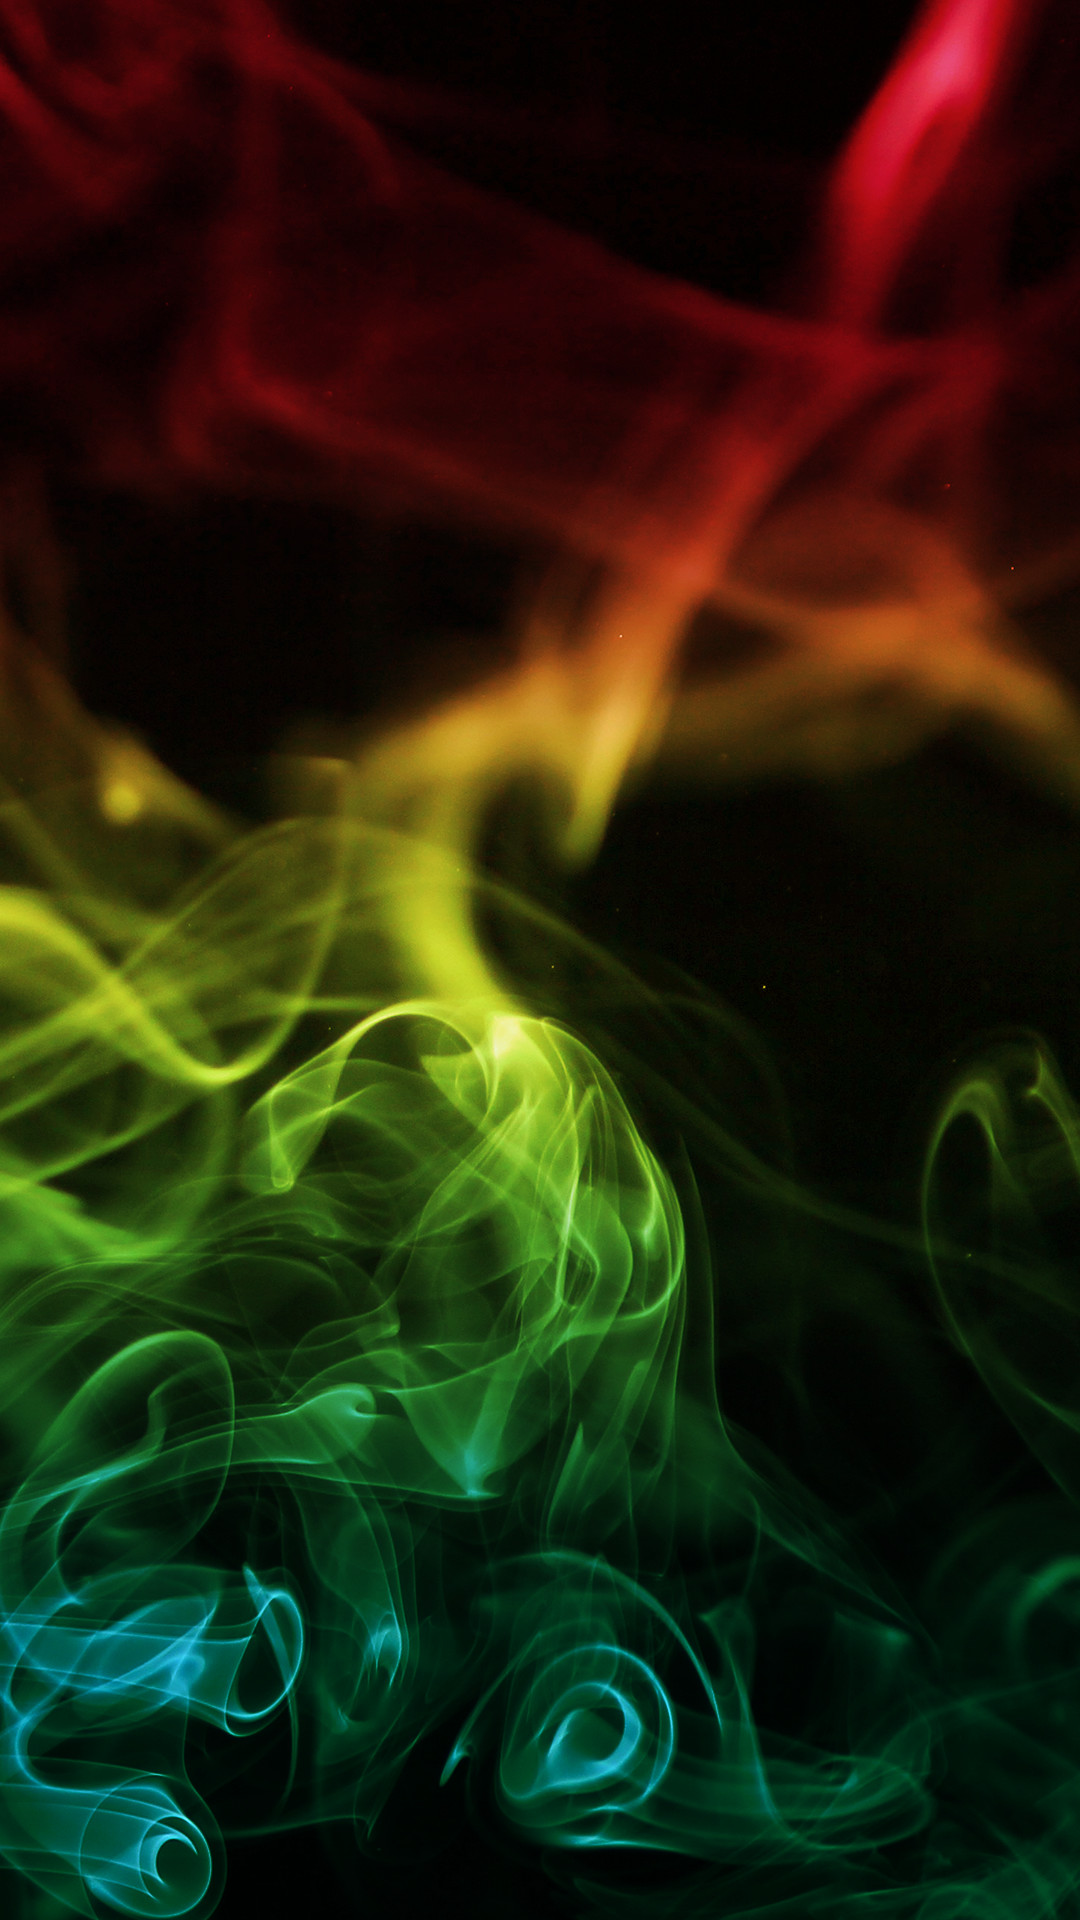 Smoke Wallpaper Hd For Iphone 76 Images